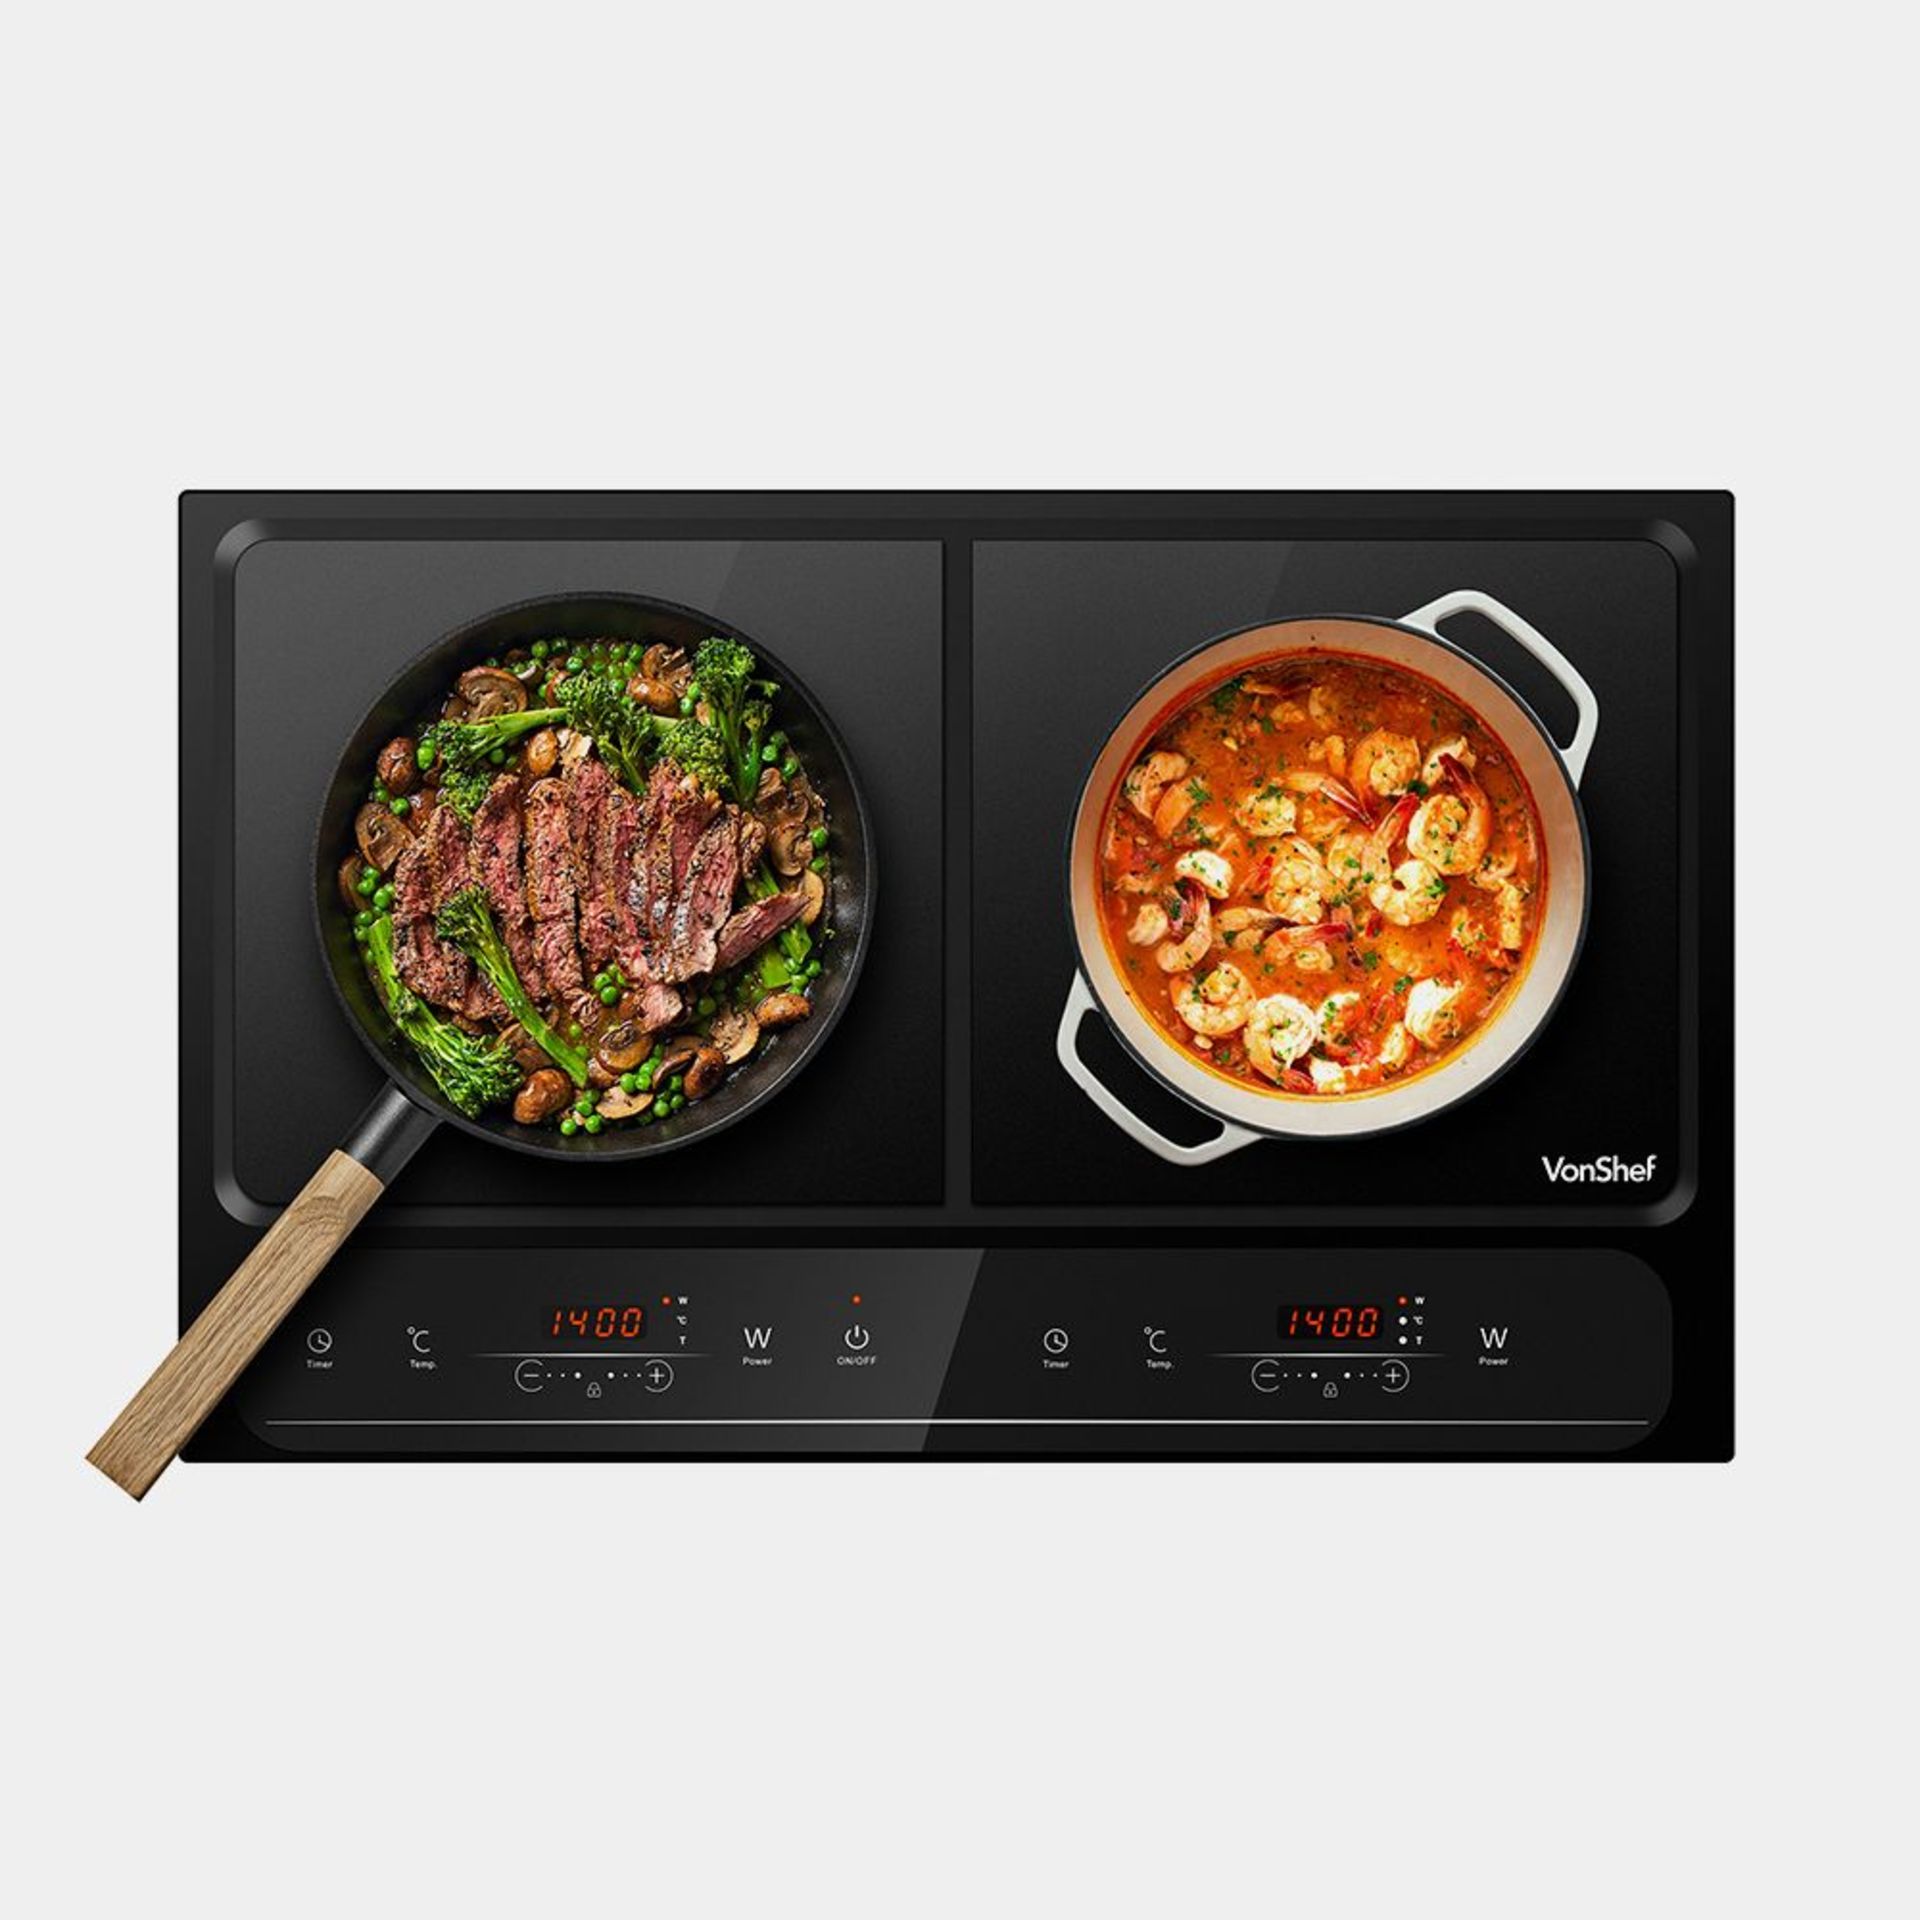 Dual Induction hob 2800W. - BI. No more scrubbing burnt food off your cooker; an induction hob